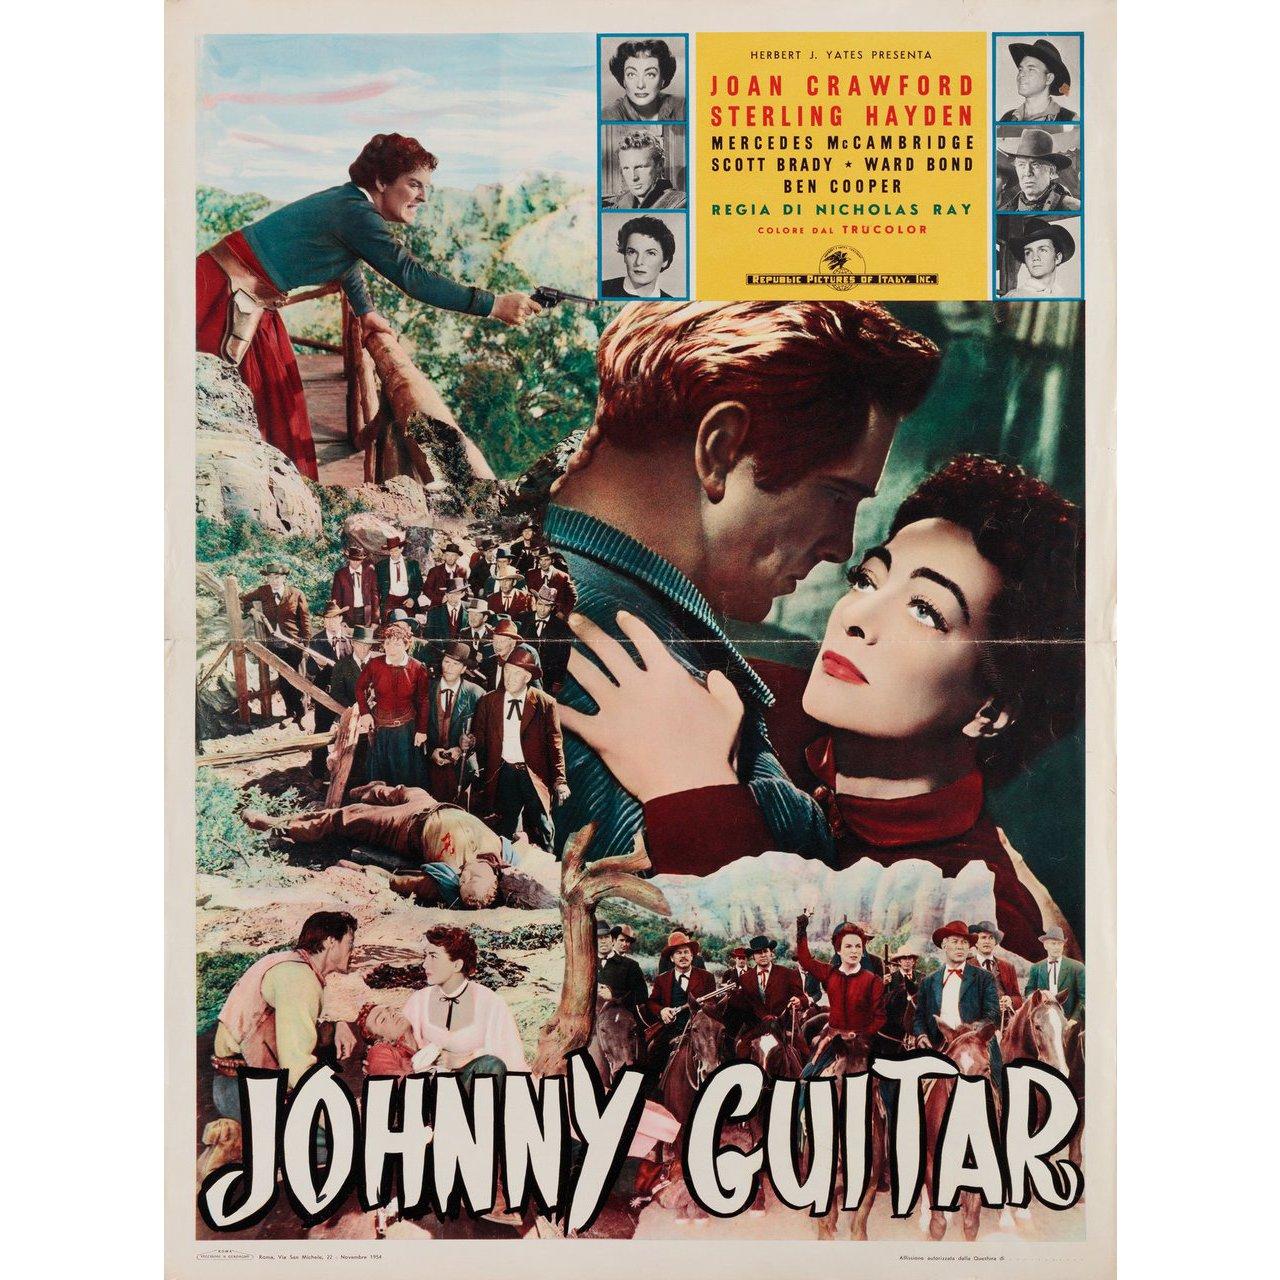 Original 1954 Italian fotobusta poster for the film Johnny Guitar directed by Nicholas Ray with Joan Crawford / Sterling Hayden / Mercedes McCambridge / Scott Brady. Very Good-Fine condition, folded. Many original posters were issued folded or were